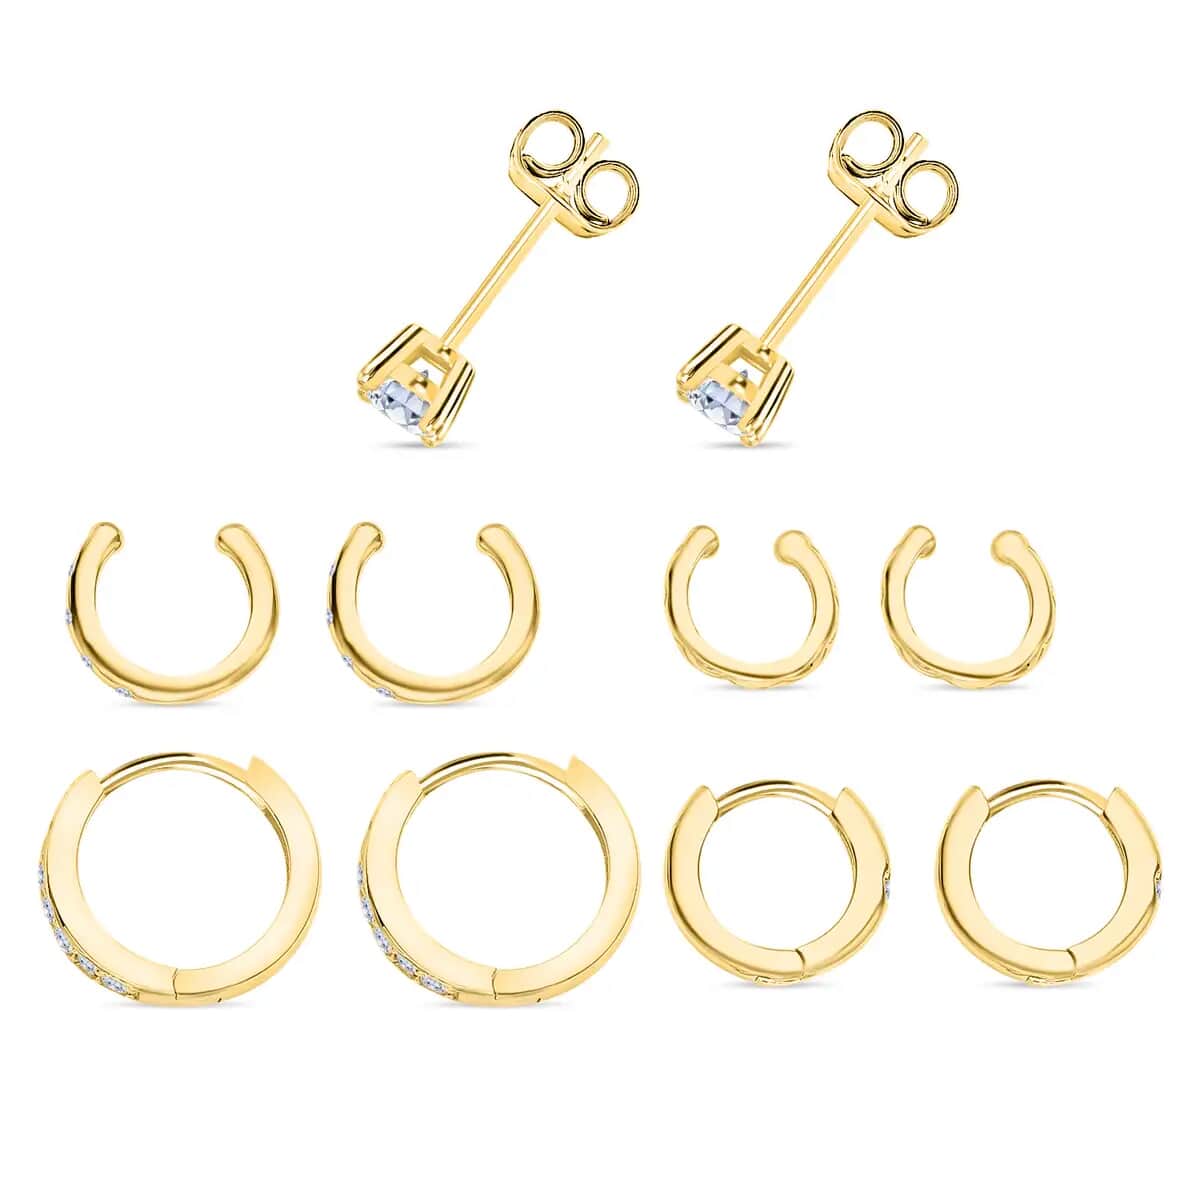 Ear Party, Set of 5 Simulate Diamond Earring Pairs, 1 Heart Studded Huggie Hoops, 1 Studded Huggie Hoops, 1 Tribal Pattern Ear Cuffs, 1 Plain Ear Cuffs, 1 Studs in 14K RG Over Sterling Silve image number 3